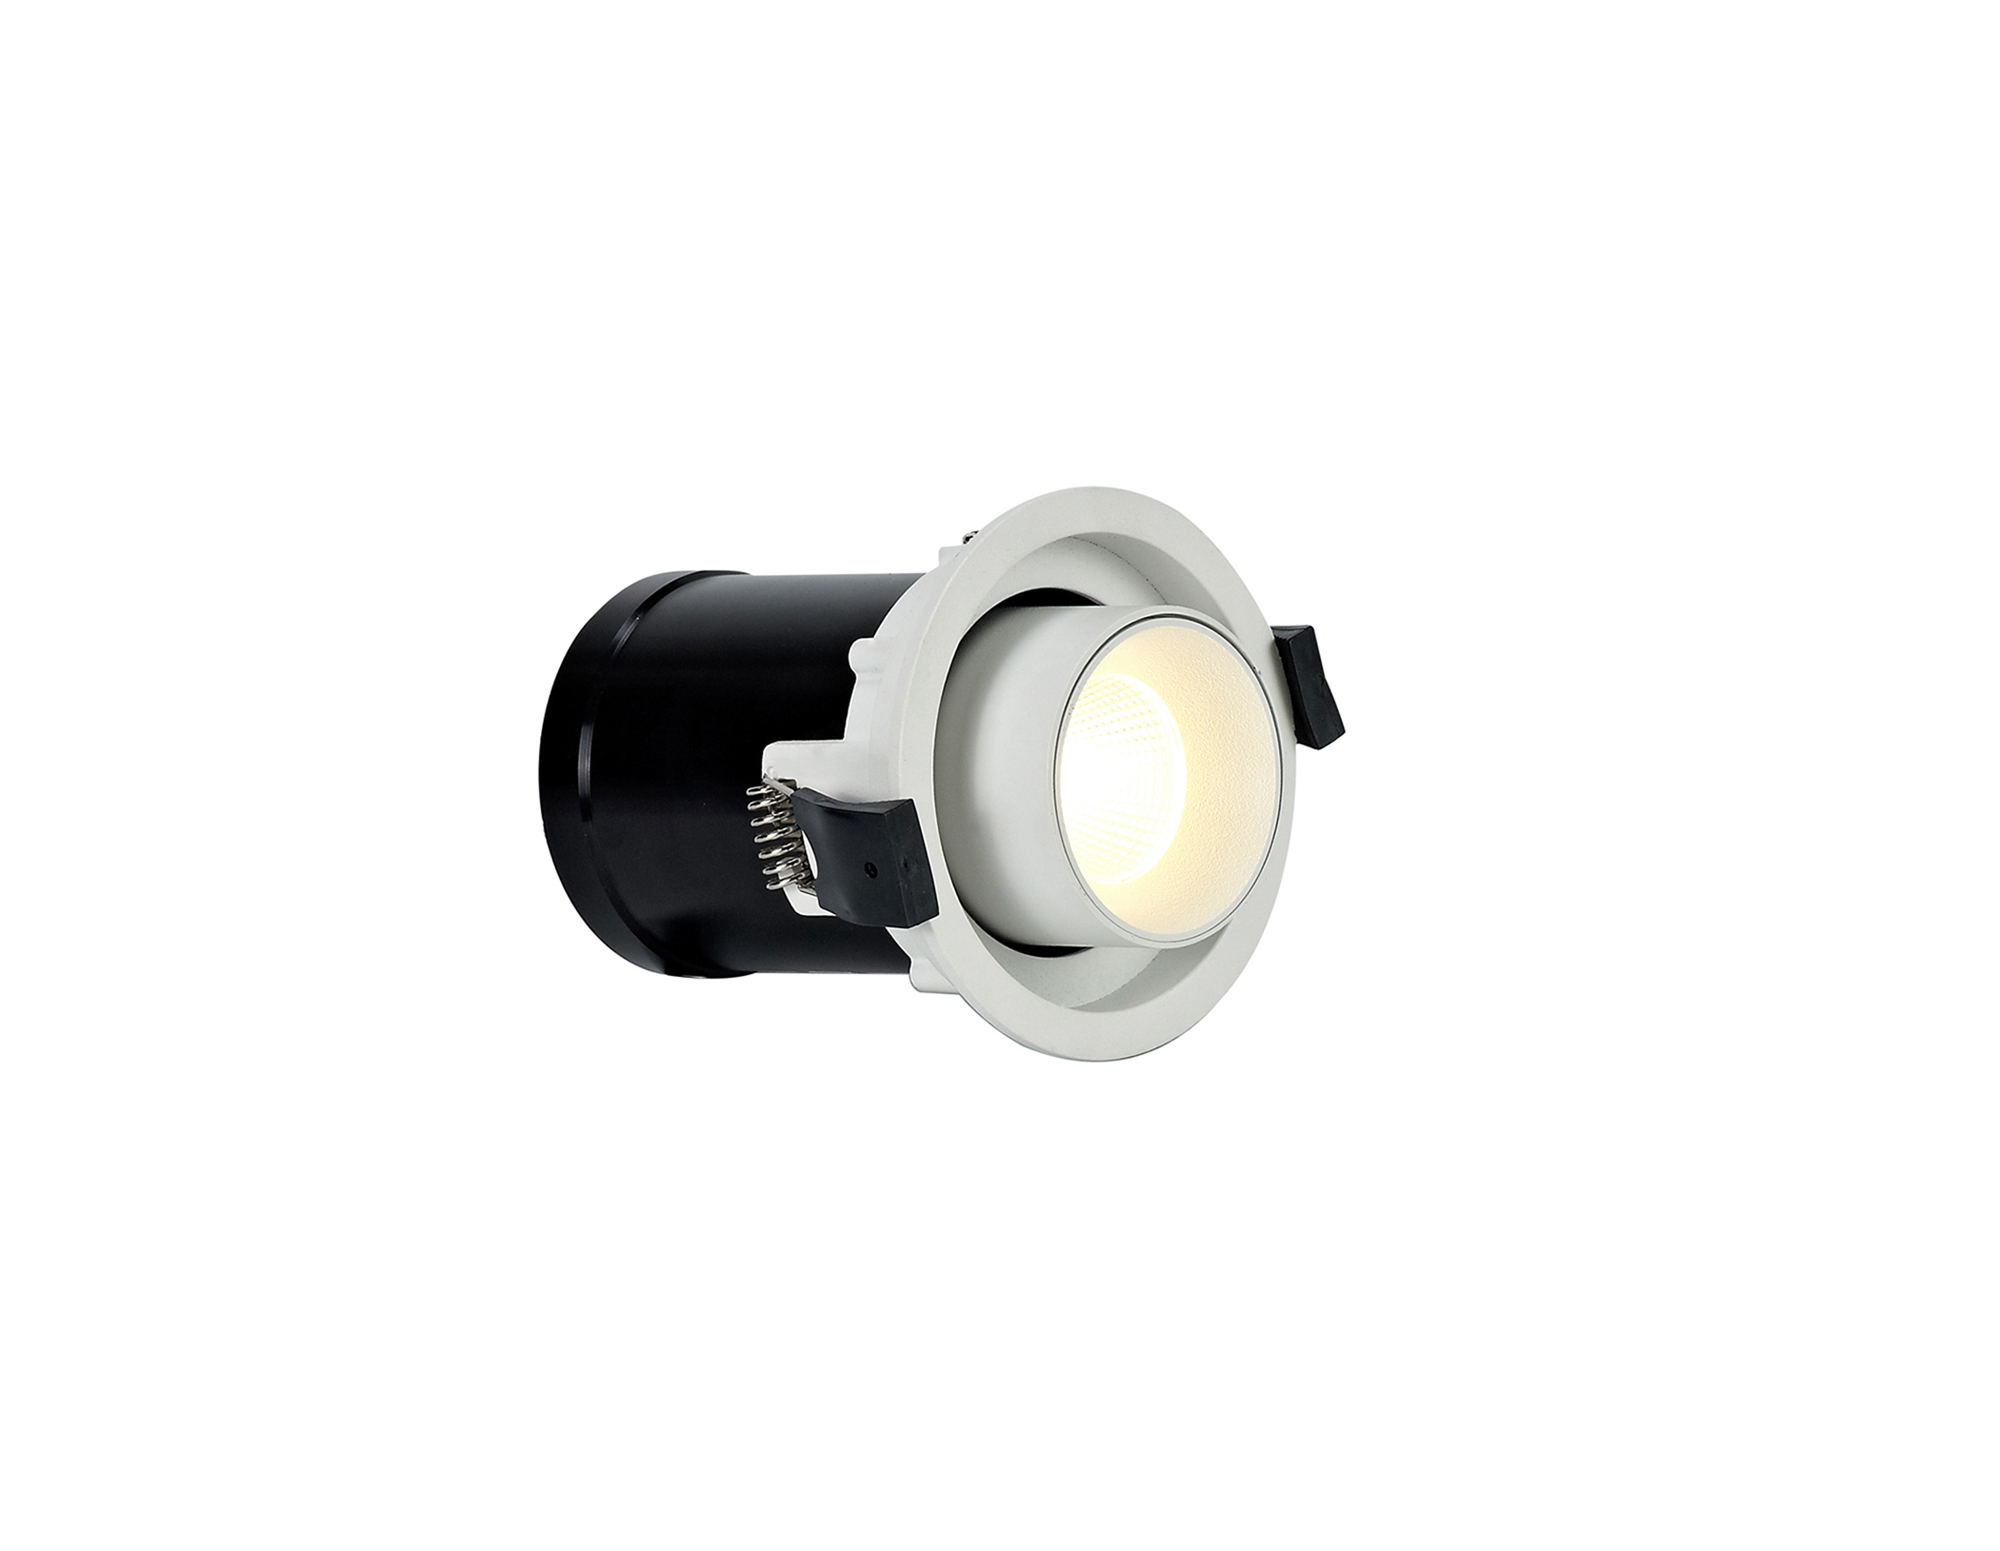 DX200372  Barda Retractable Recessed Swivel Round Spotlight; 8W; 3000K; 24°;585lm;White & White; Dia: 85mm Cut Out 75mm; 3yrs Warranty